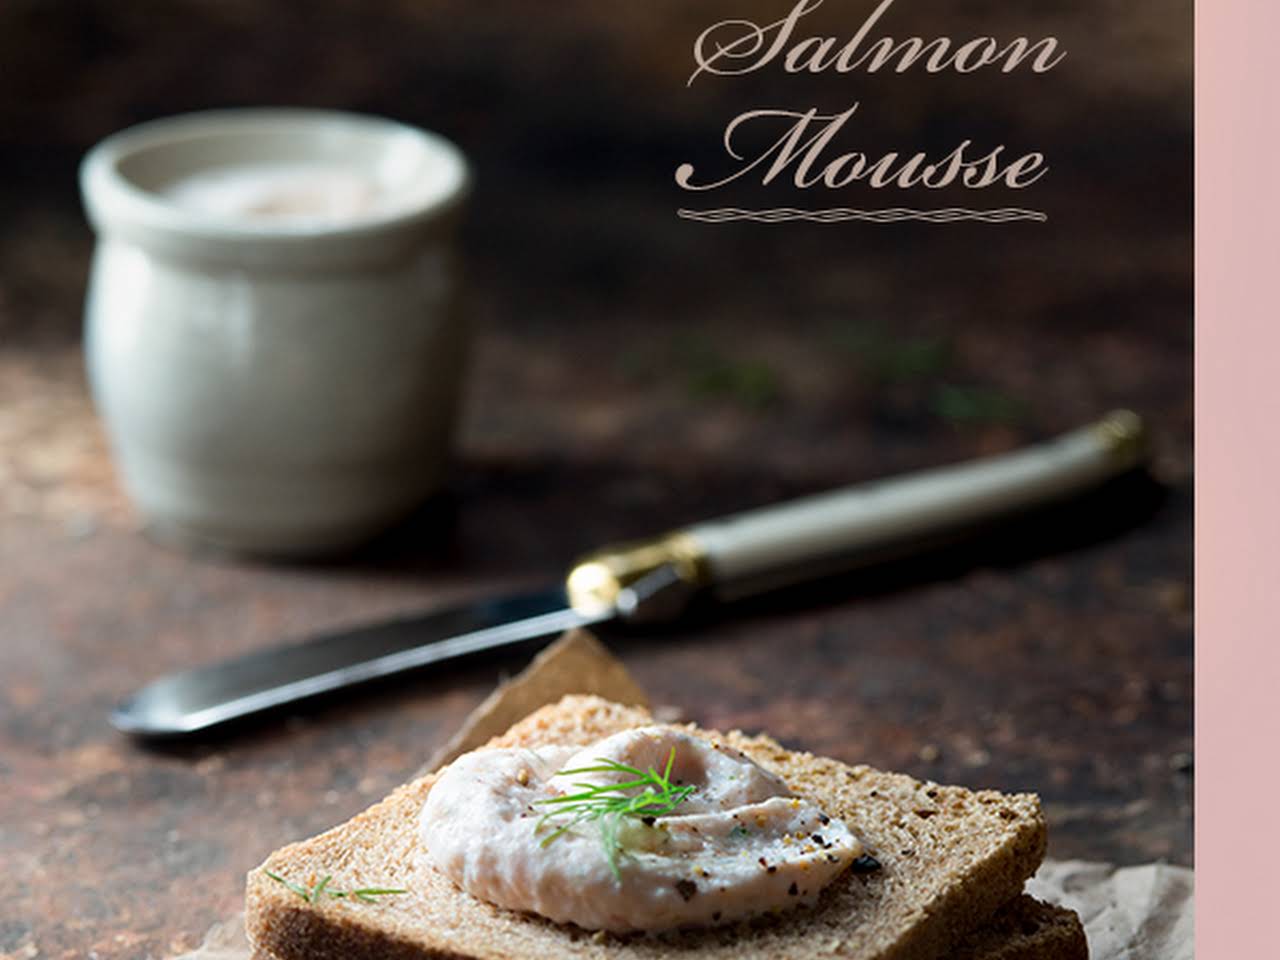 10 Best Salmon Mousse With Gelatin Recipes Yummly